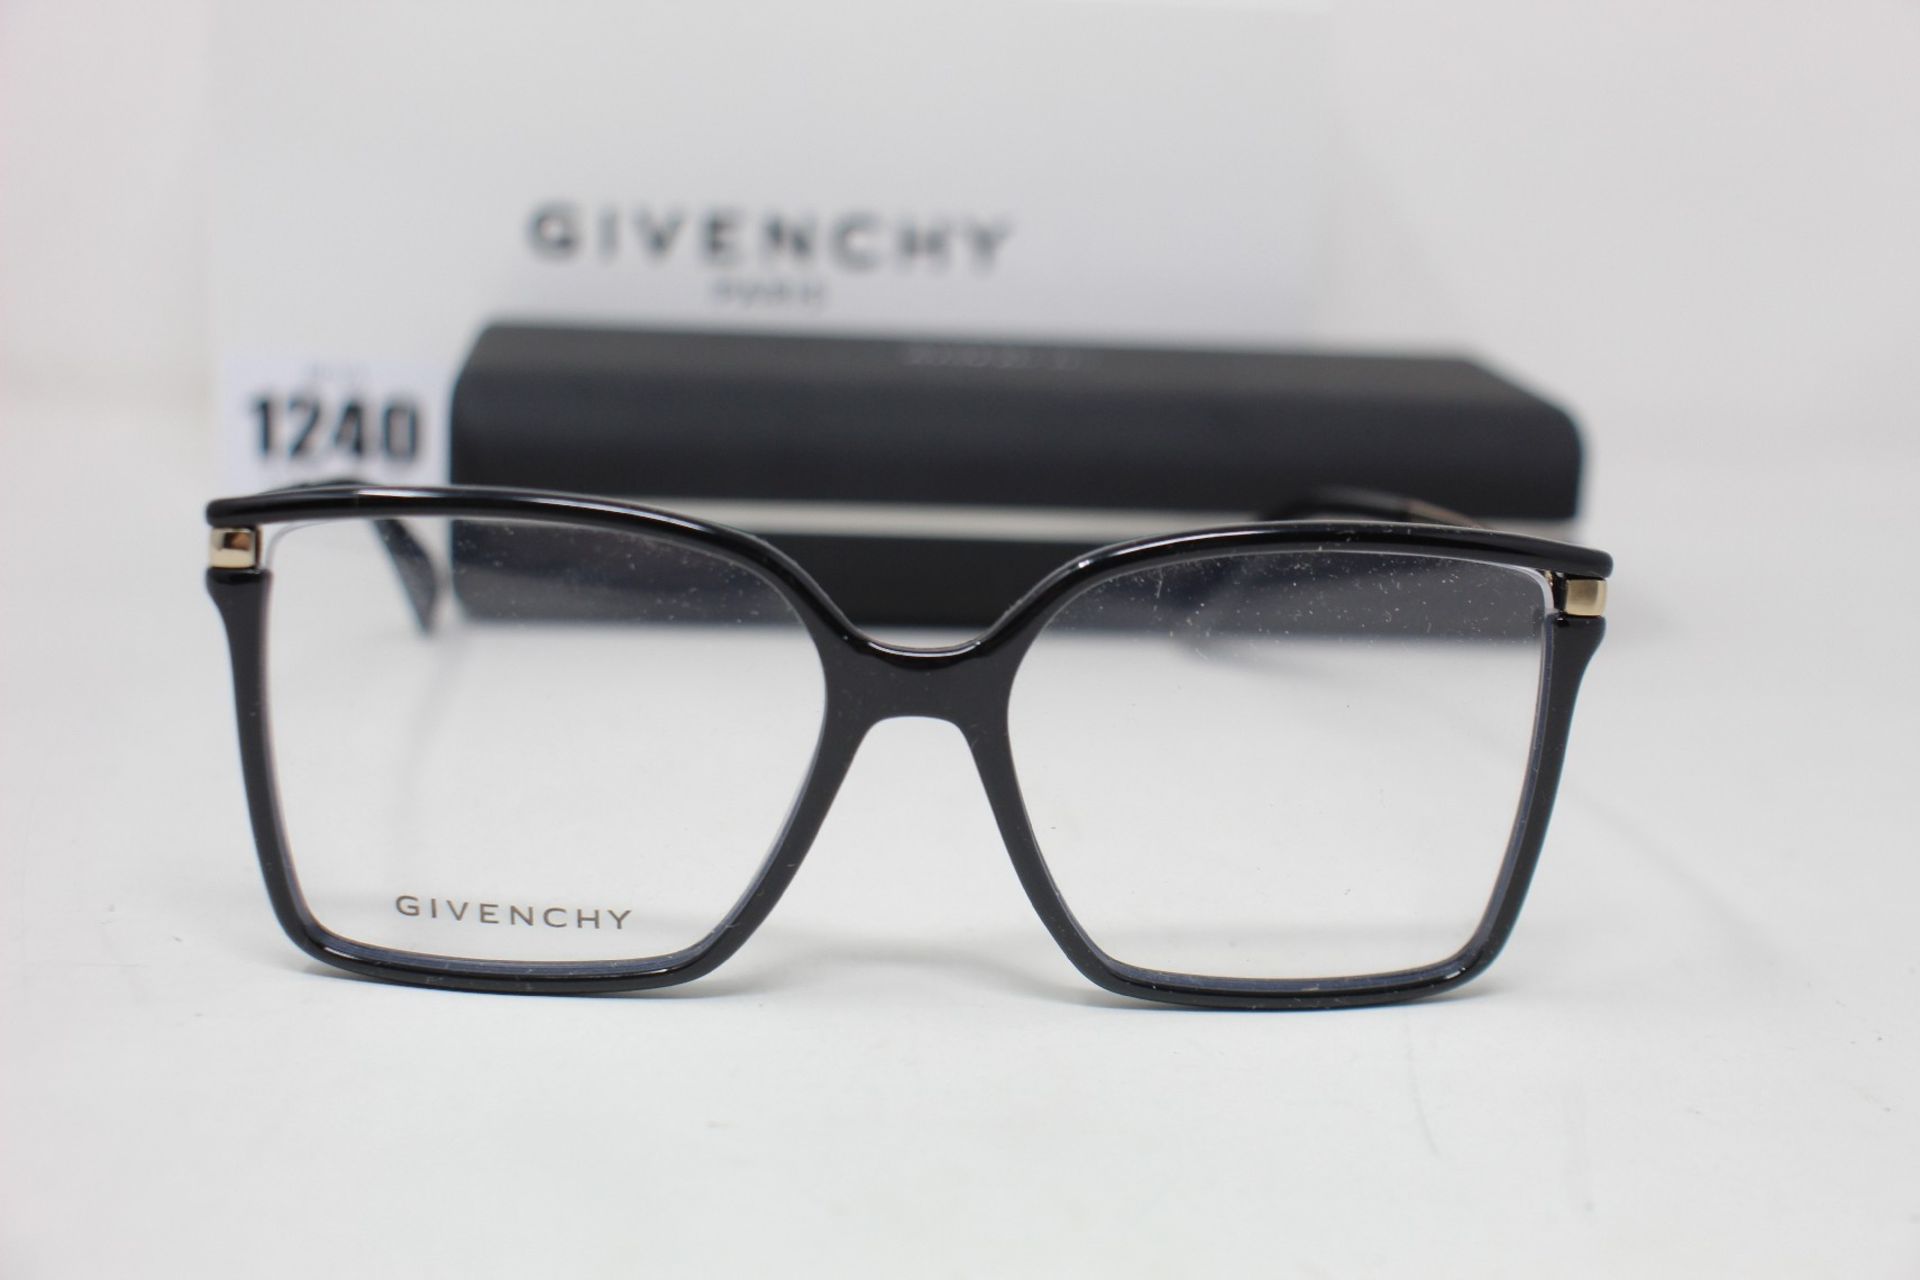 A pair of as new Givenchy glasses frames.